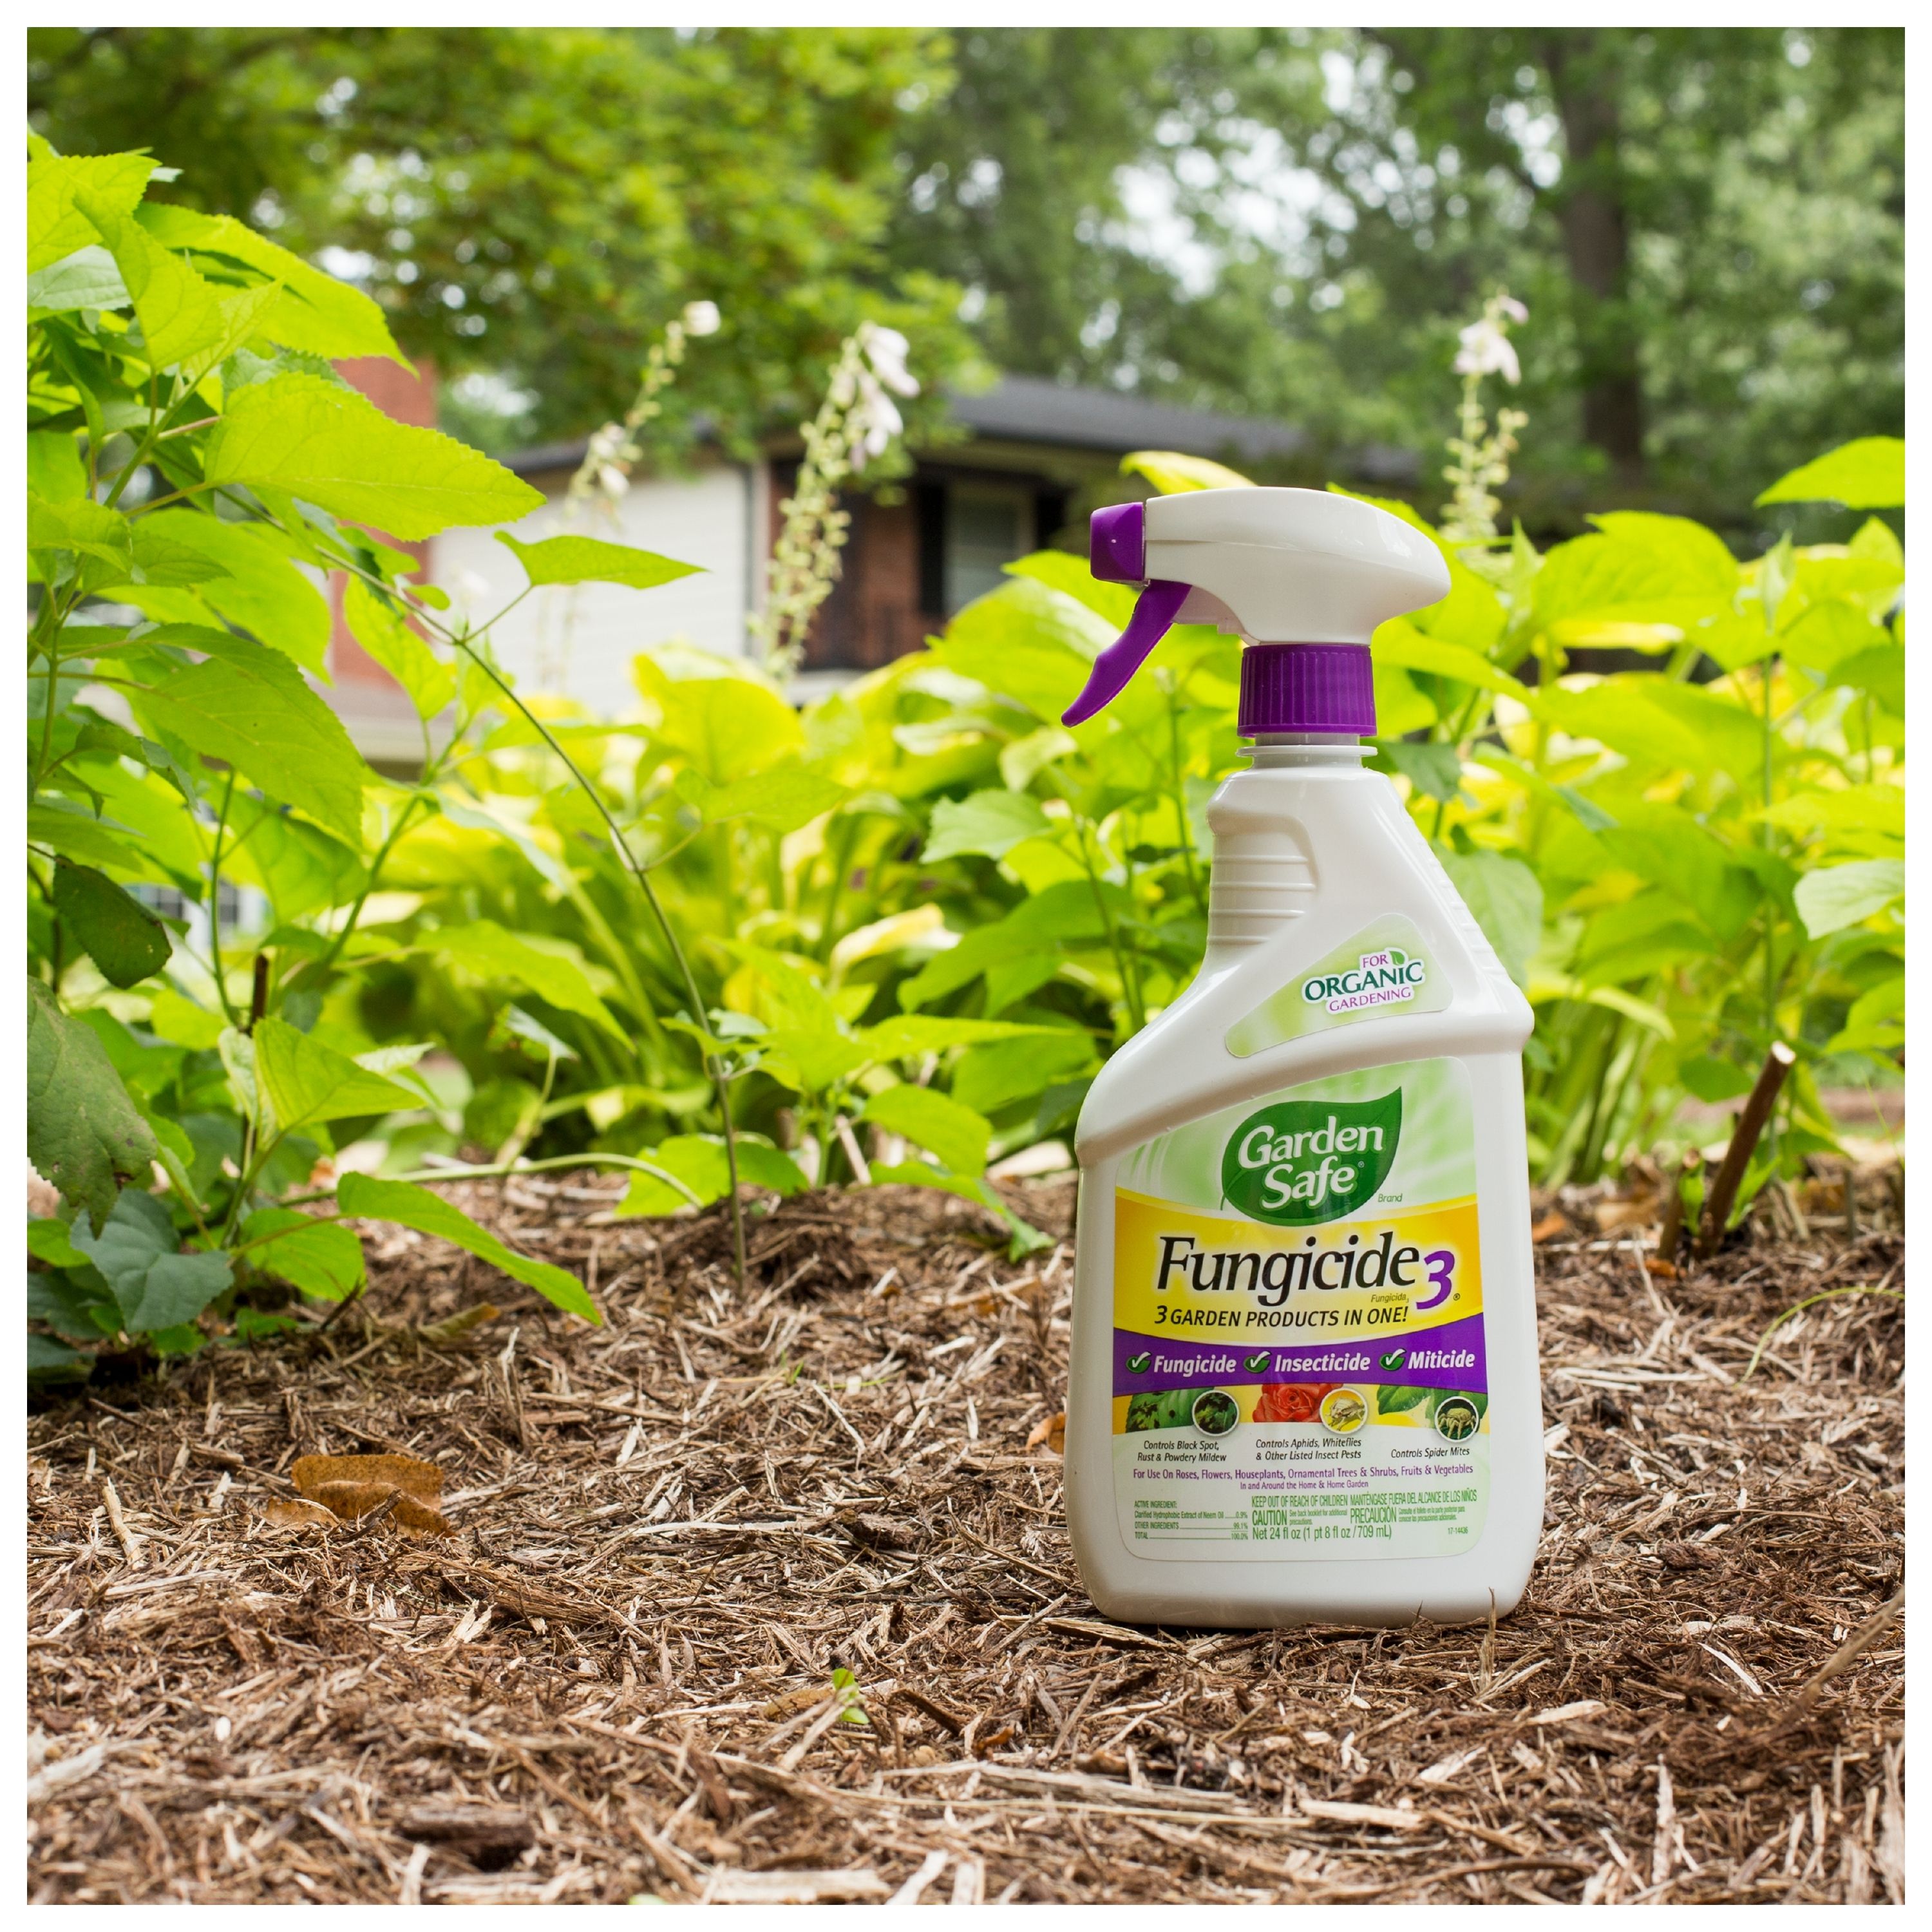 Garden Safe Brand Fungicide3 24 Ounces, 3 Garden Products in 1 - image 4 of 5